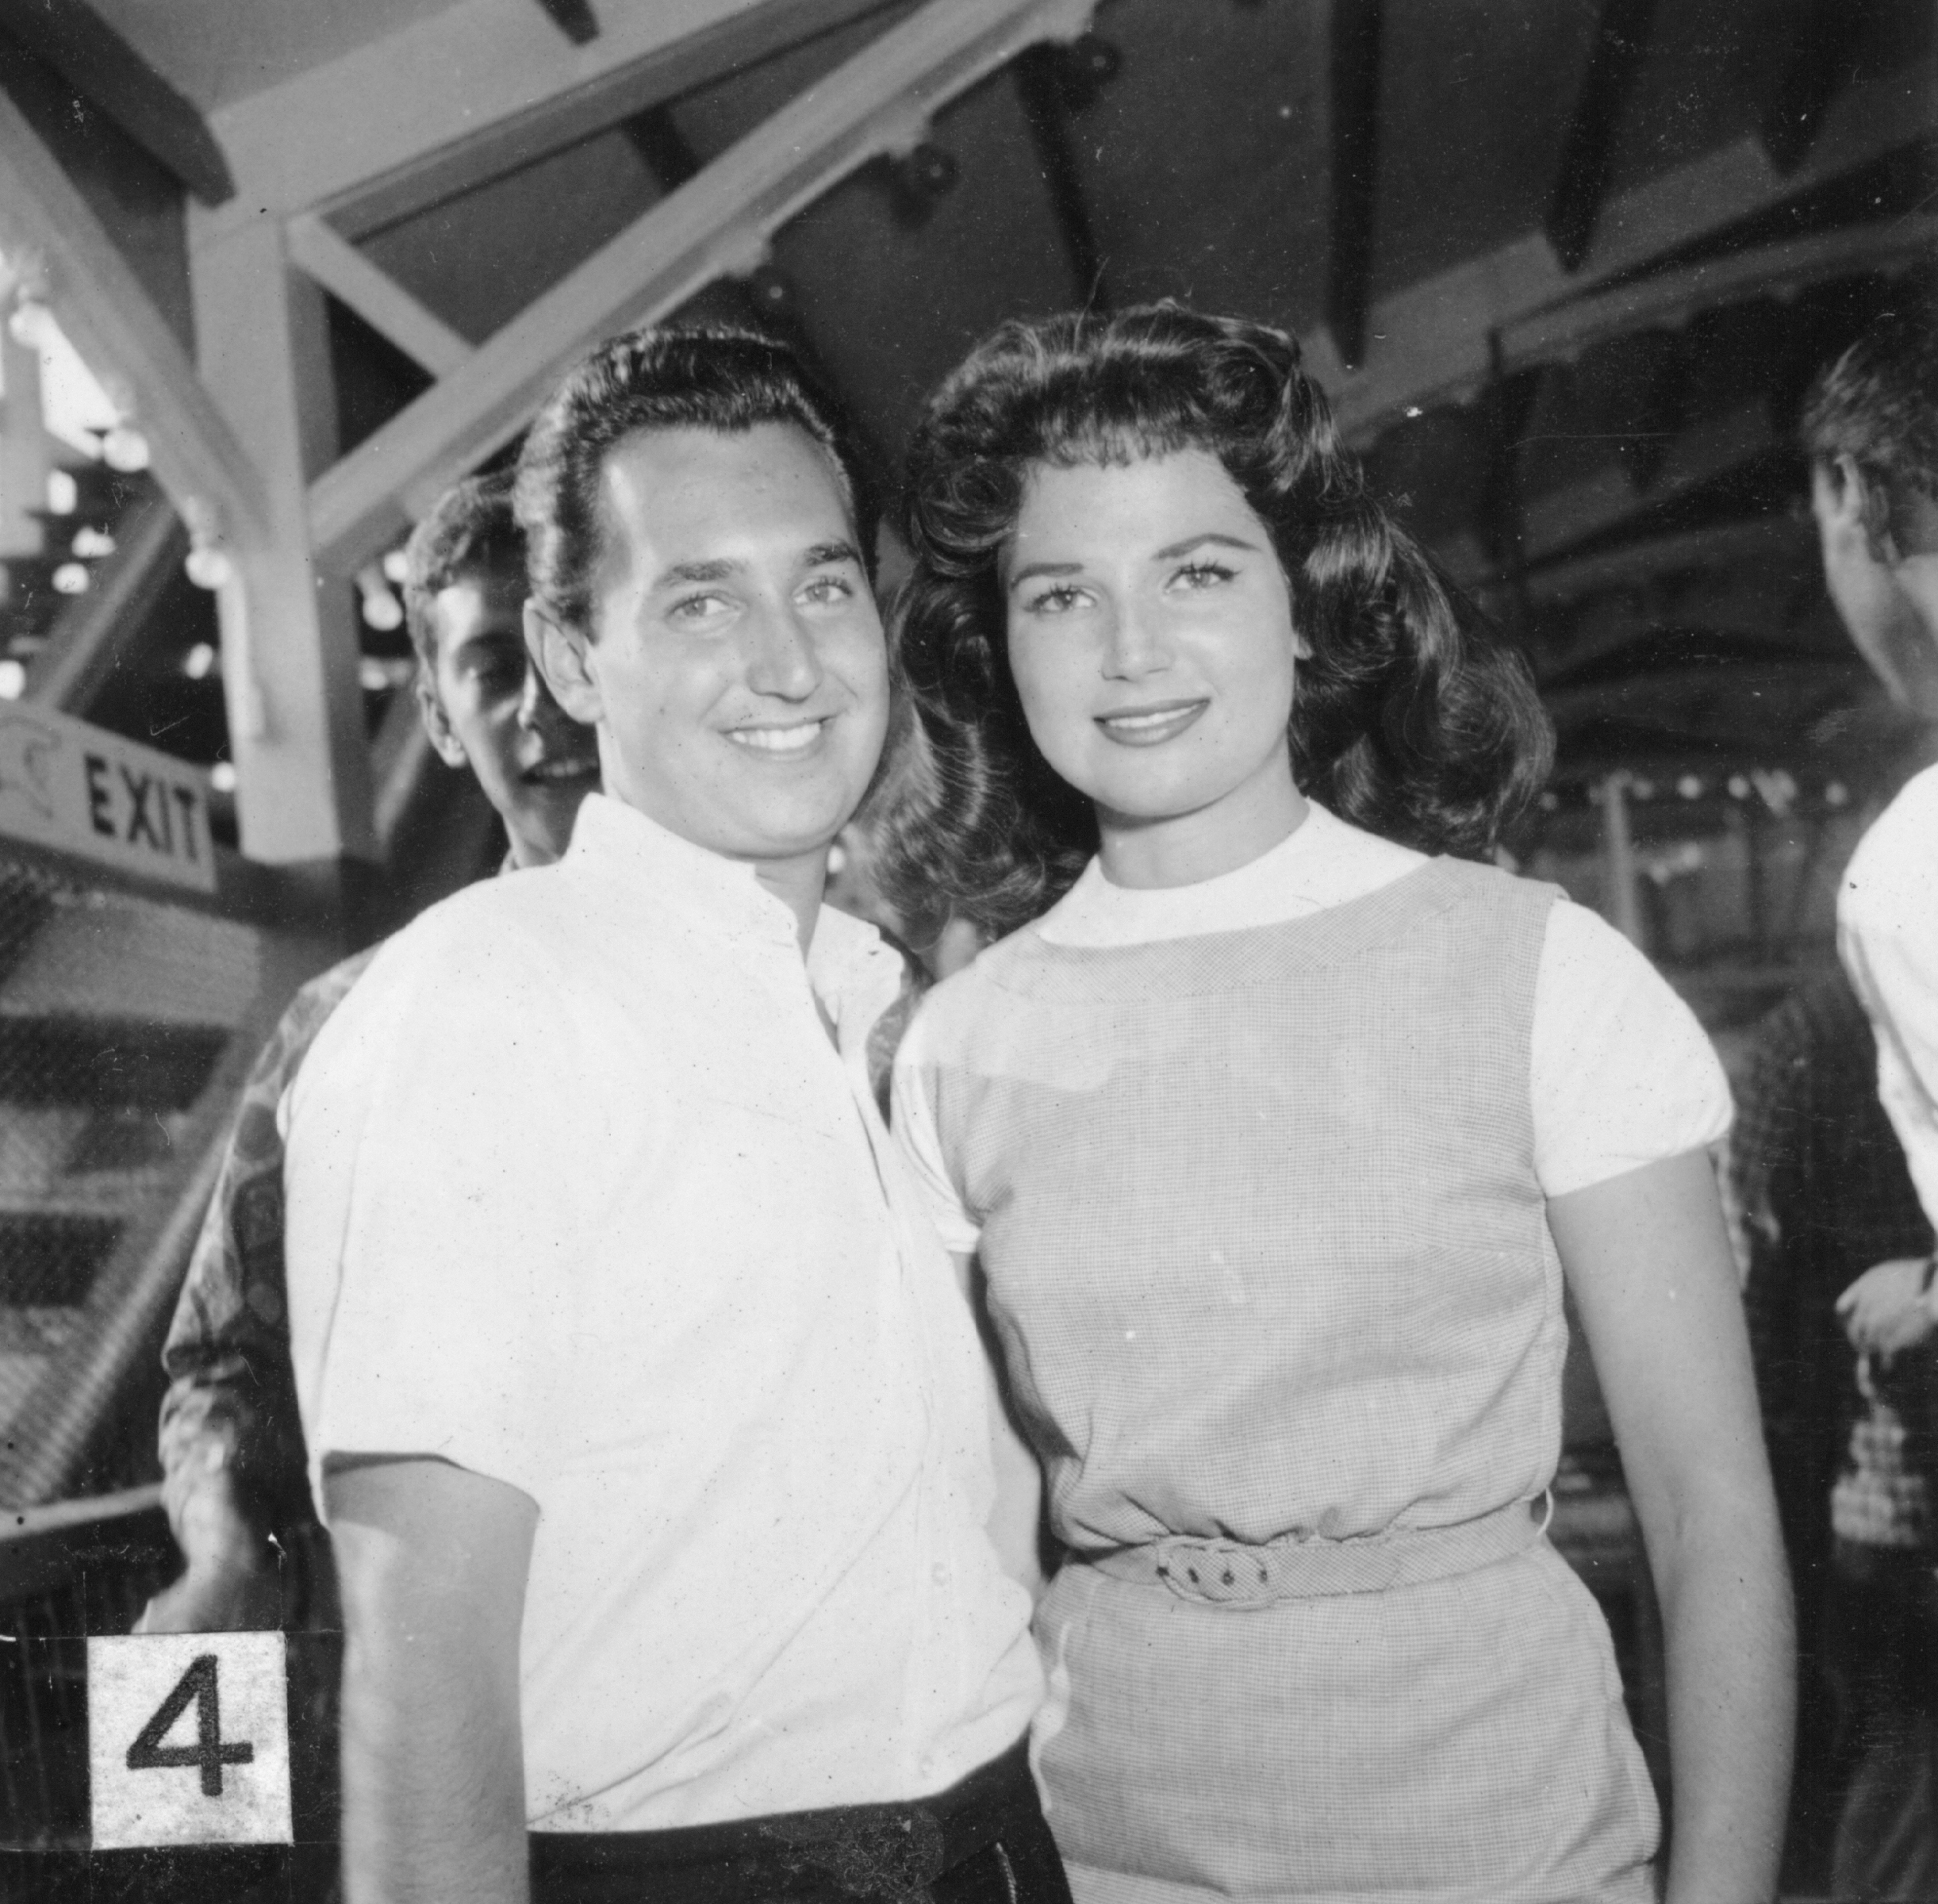 Neil Sedaka and Leba Strassberg on a romantic date at Coney Island in New York, 1959 | Source: Getty Images